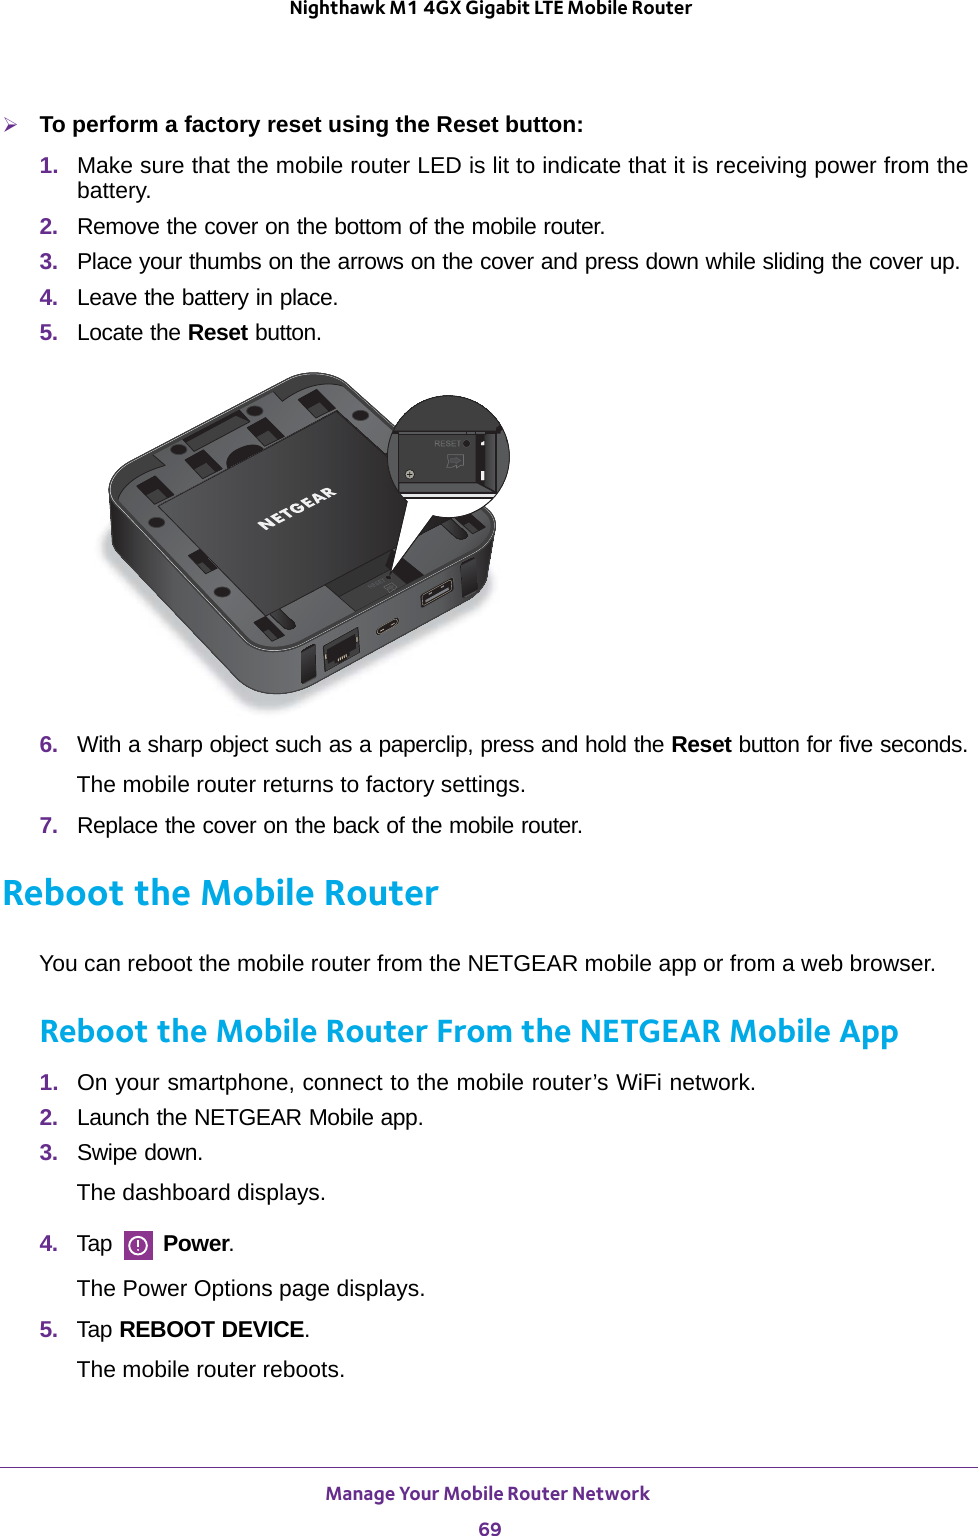 Manage Your Mobile Router Network 69 Nighthawk M1 4GX Gigabit LTE Mobile RouterTo perform a factory reset using the Reset button:1.  Make sure that the mobile router LED is lit to indicate that it is receiving power from the battery.2.  Remove the cover on the bottom of the mobile router. 3.  Place your thumbs on the arrows on the cover and press down while sliding the cover up.4.  Leave the battery in place.5.  Locate the Reset button.6.  With a sharp object such as a paperclip, press and hold the Reset button for five seconds.The mobile router returns to factory settings.7.  Replace the cover on the back of the mobile router.Reboot the Mobile RouterYou can reboot the mobile router from the NETGEAR mobile app or from a web browser.Reboot the Mobile Router From the NETGEAR Mobile App1.  On your smartphone, connect to the mobile router’s WiFi network.2.  Launch the NETGEAR Mobile app.3.  Swipe down.The dashboard displays.4.  Tap   Power.The Power Options page displays.5.  Tap REBOOT DEVICE.The mobile router reboots.